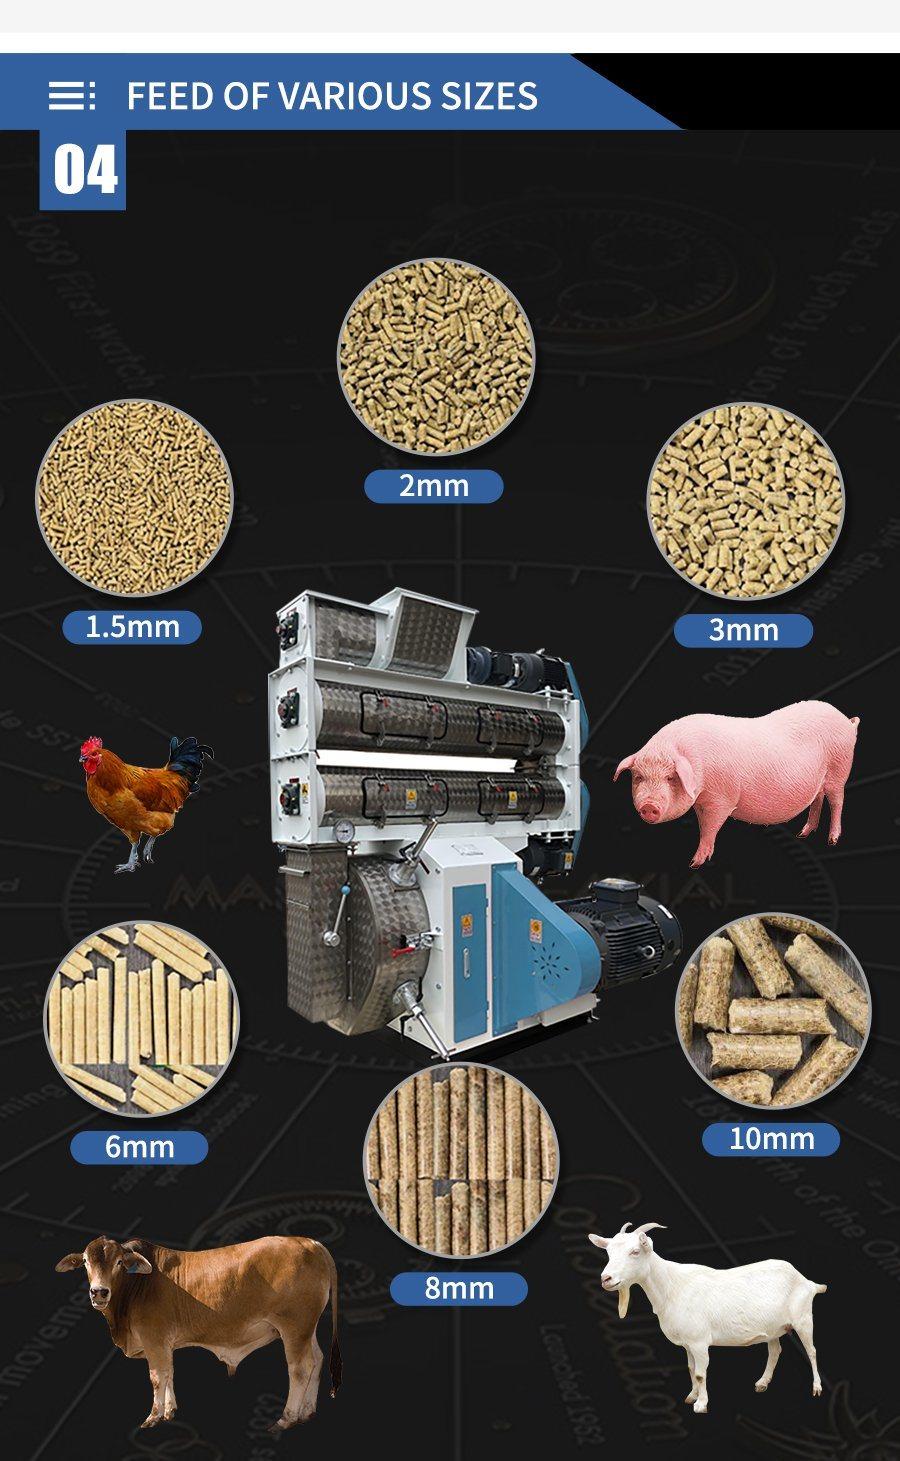 1-2tph Household Feed Machine /Livestock Pellet Equipment/Animal Pellet Mill Machine in China with Best Quality